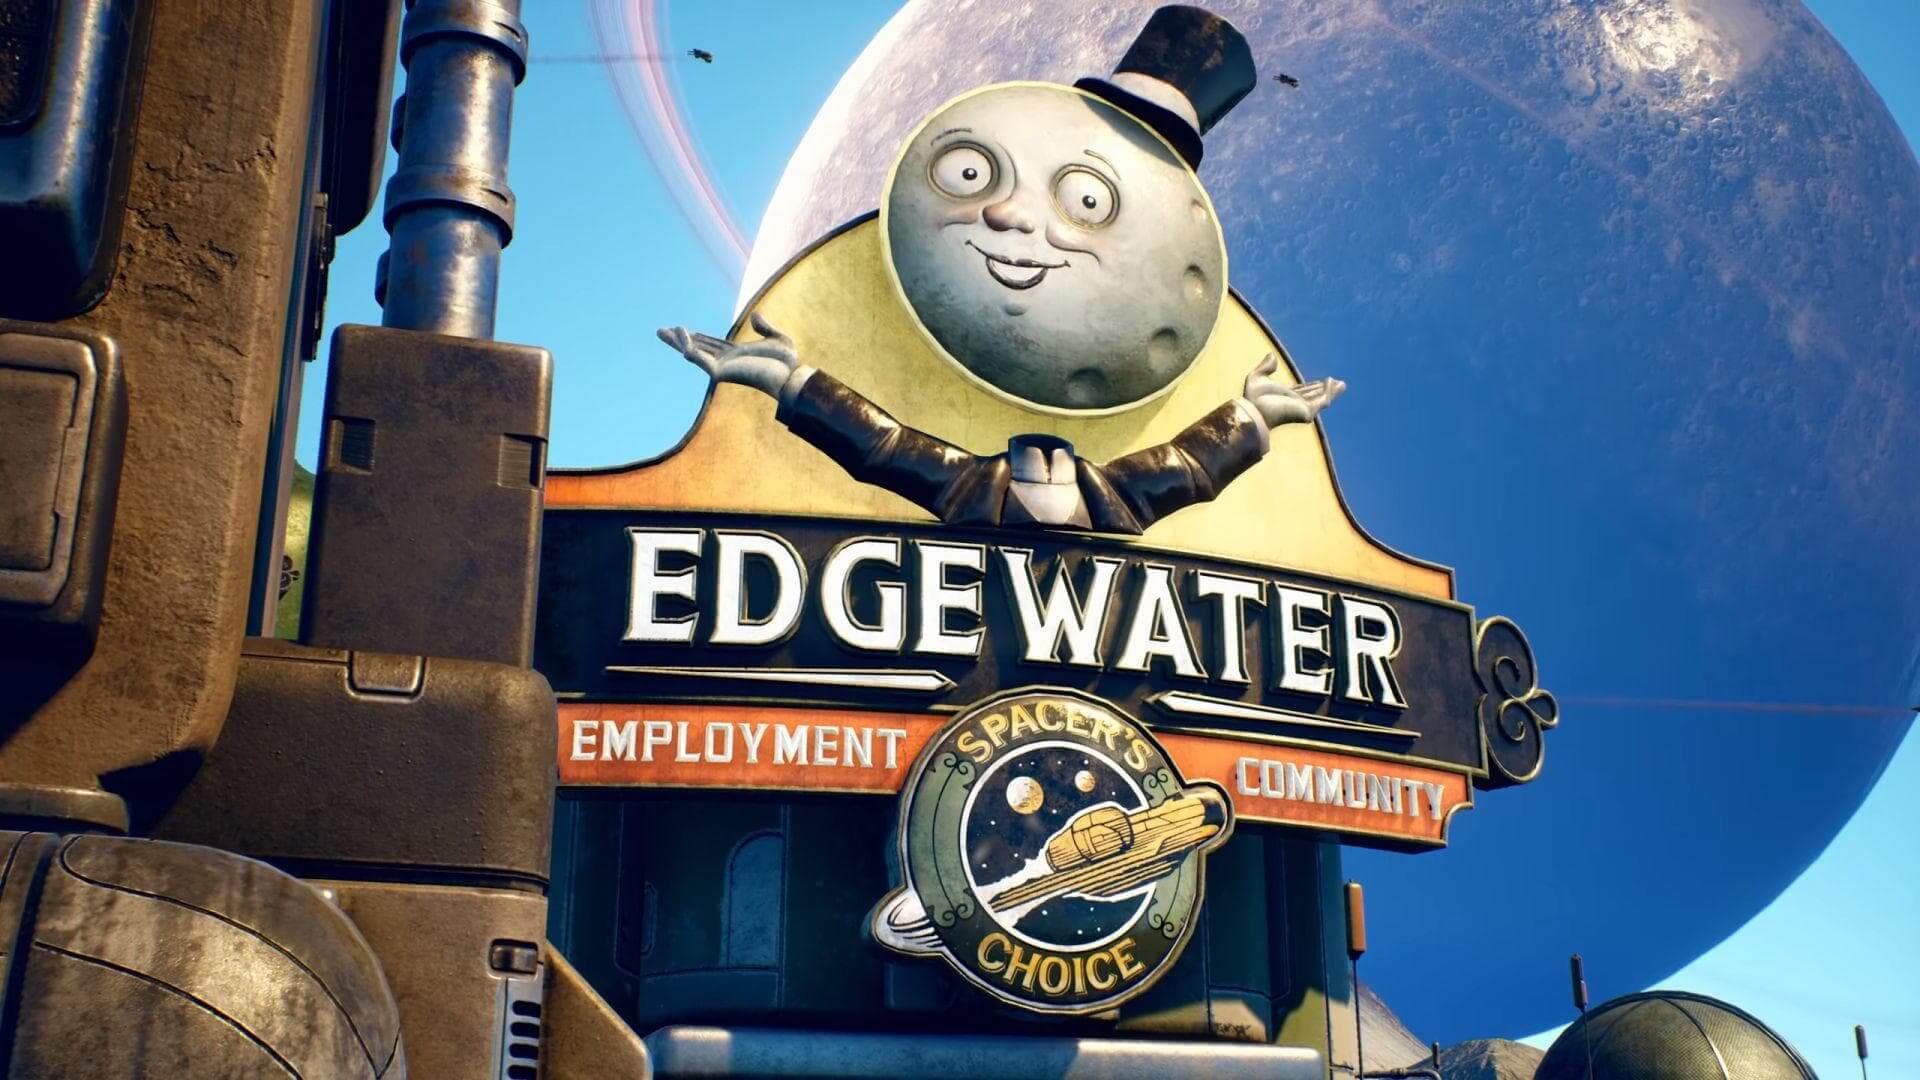 Buy The Outer Worlds: Spacer's Choice Edition